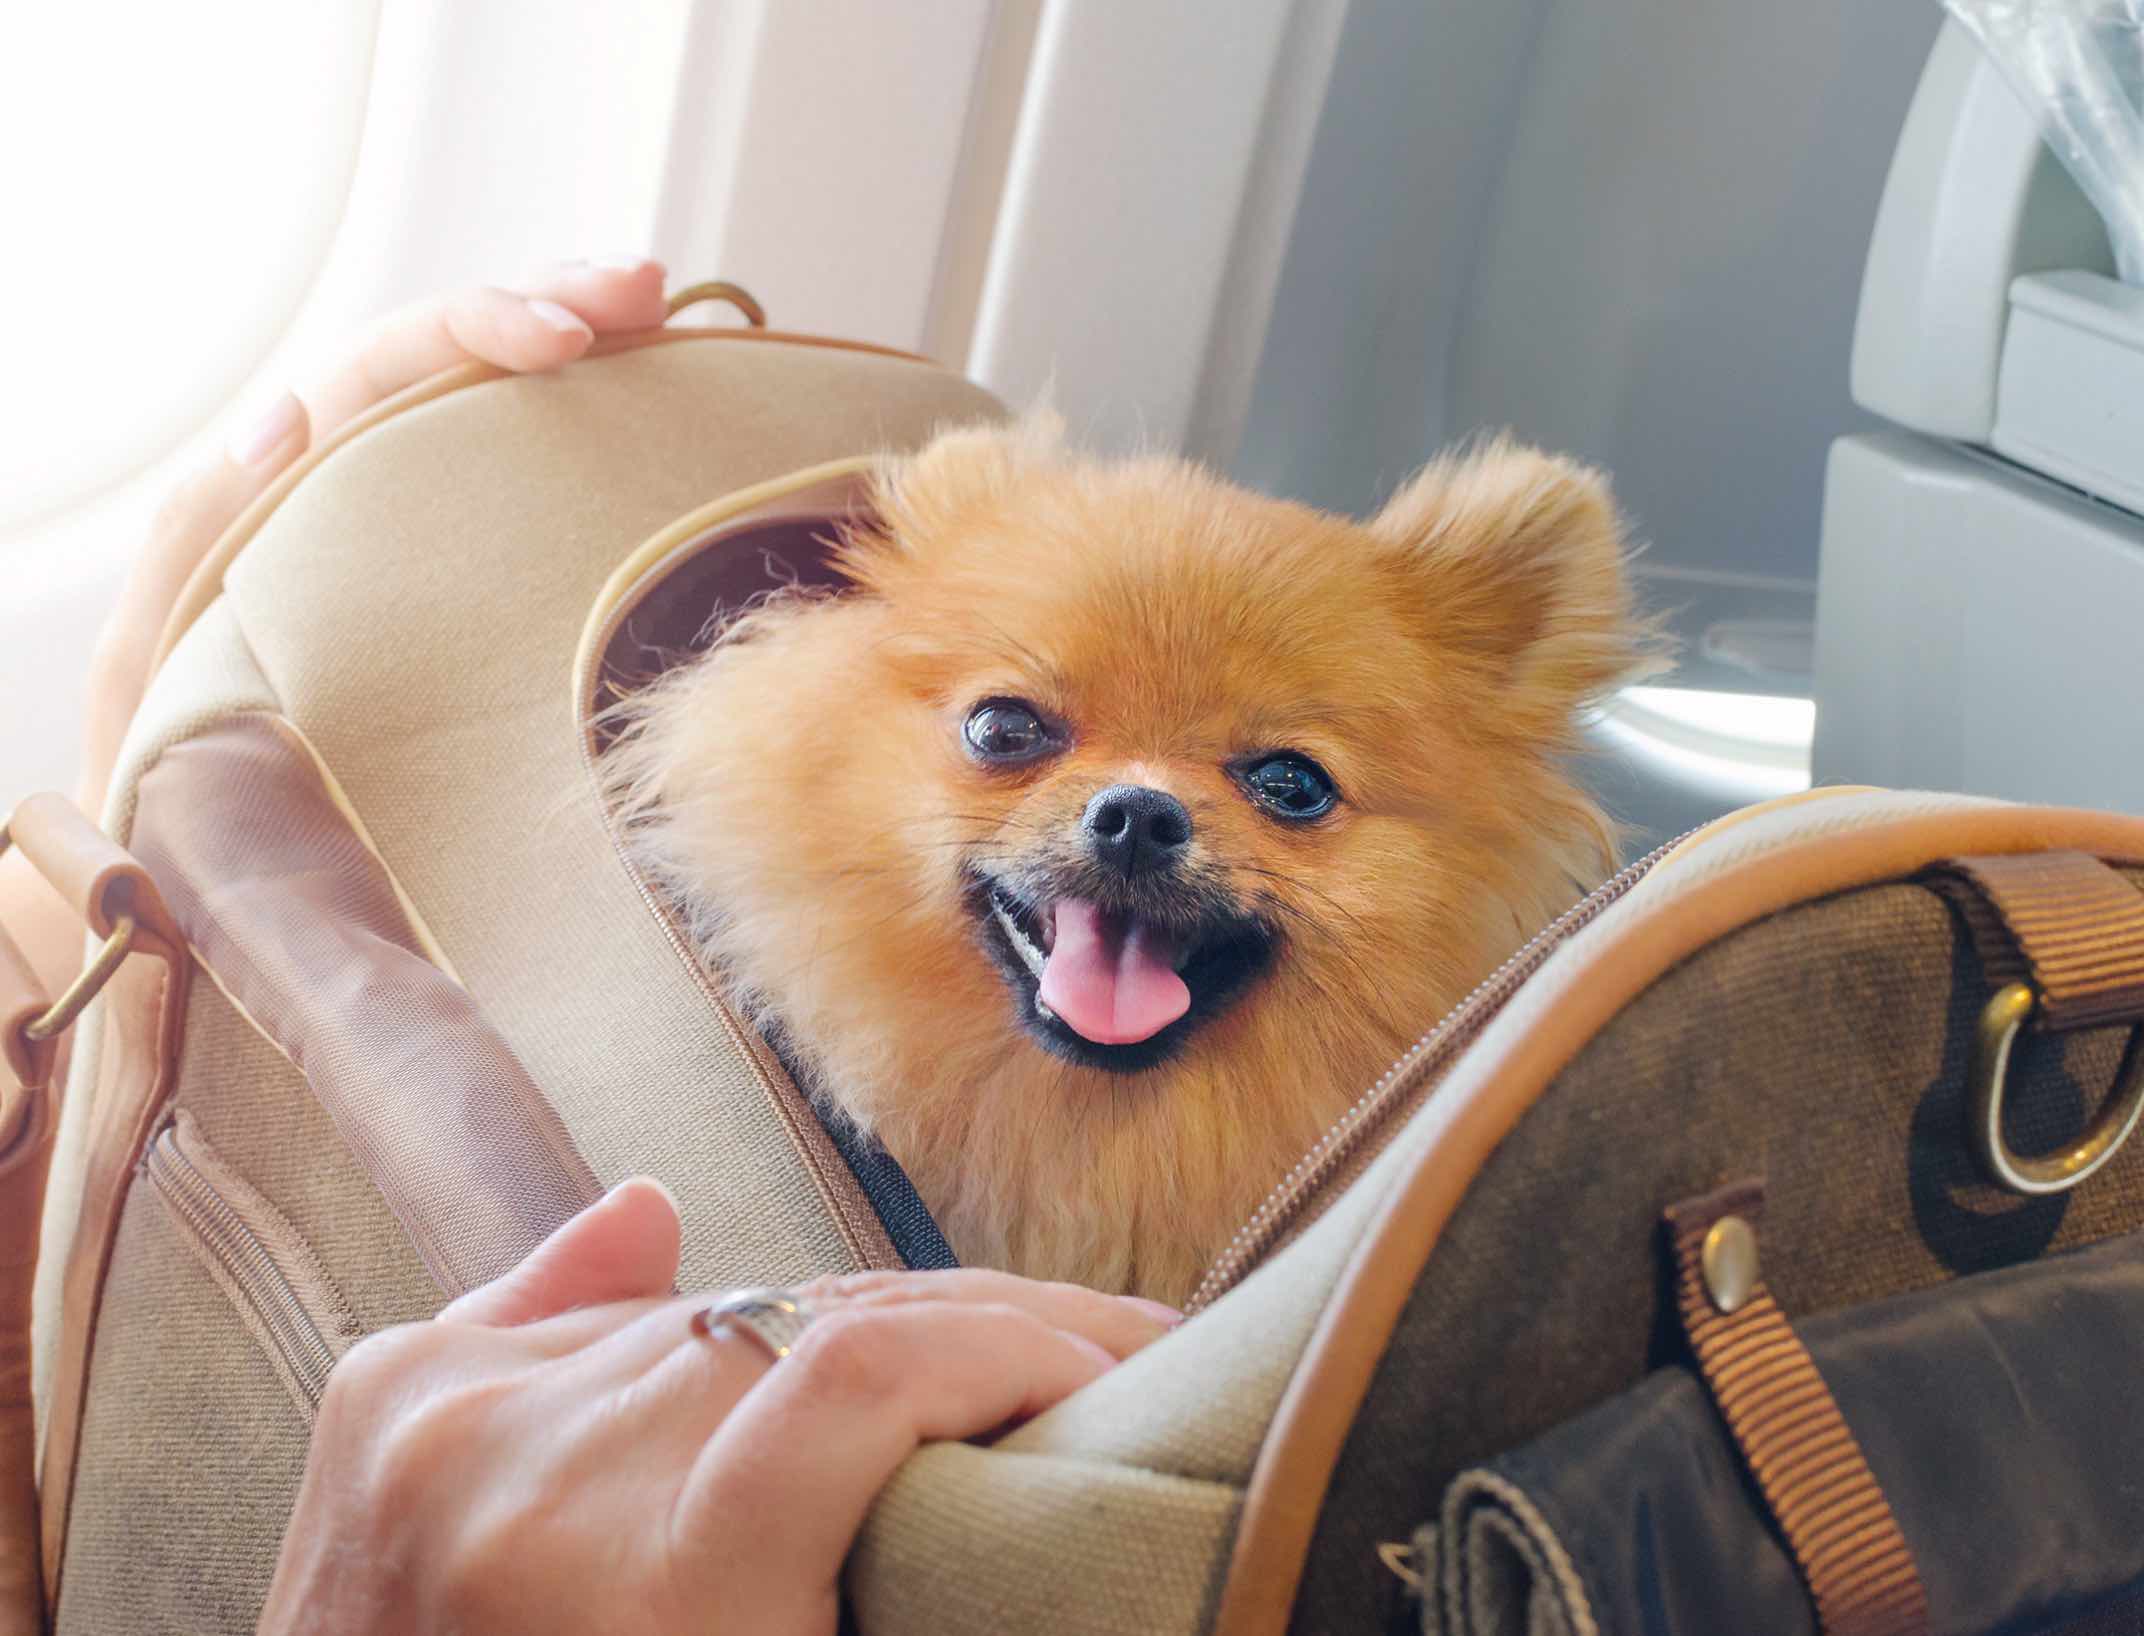 This cute dog is ready for a plane ride thanks to tips with Dog Training Elite.